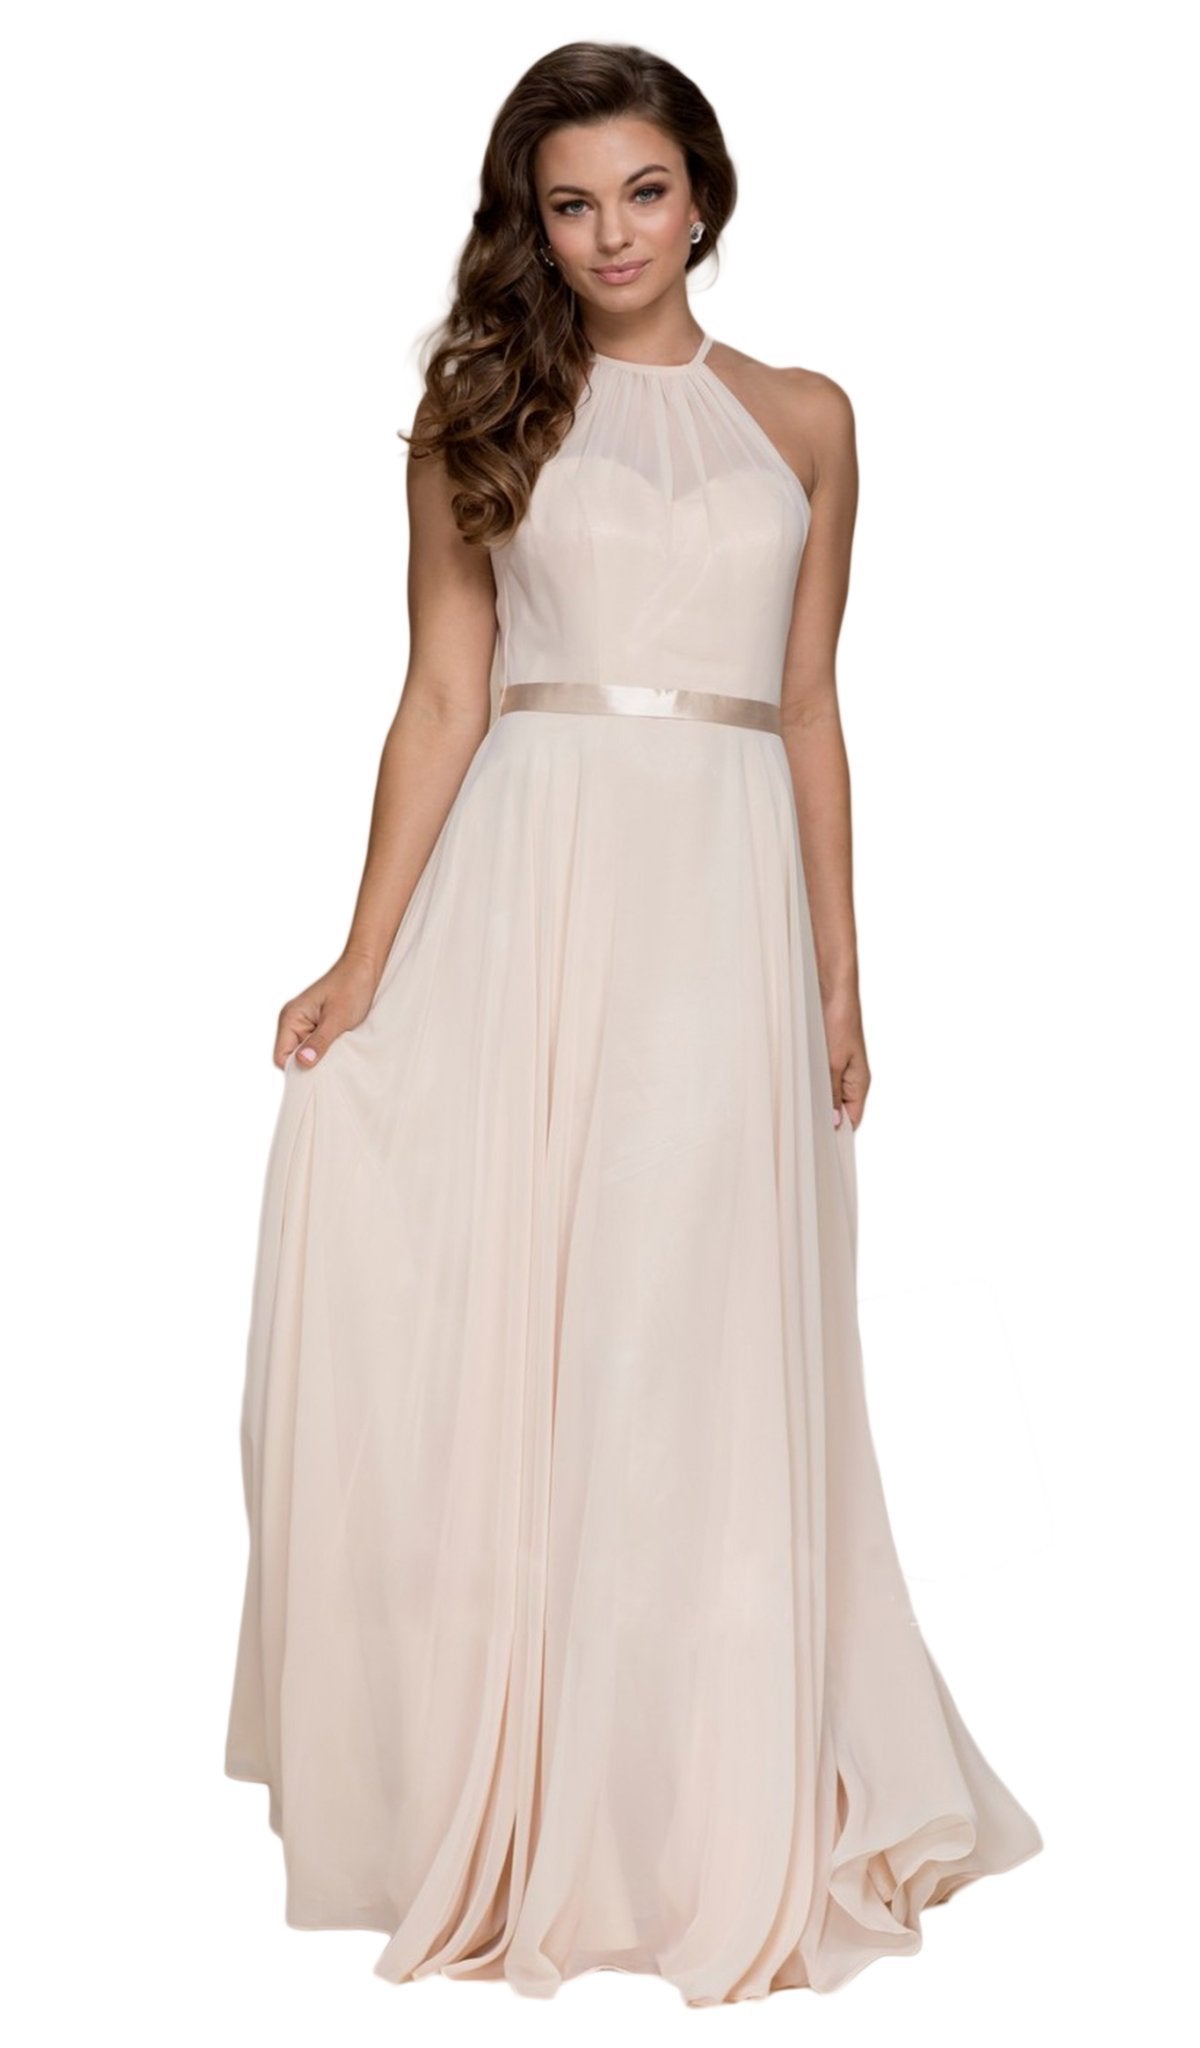 Nox Anabel - Y102P Sleeveless Halter Neck A-line Dress Special Occasion Dress 4XL / Champagne